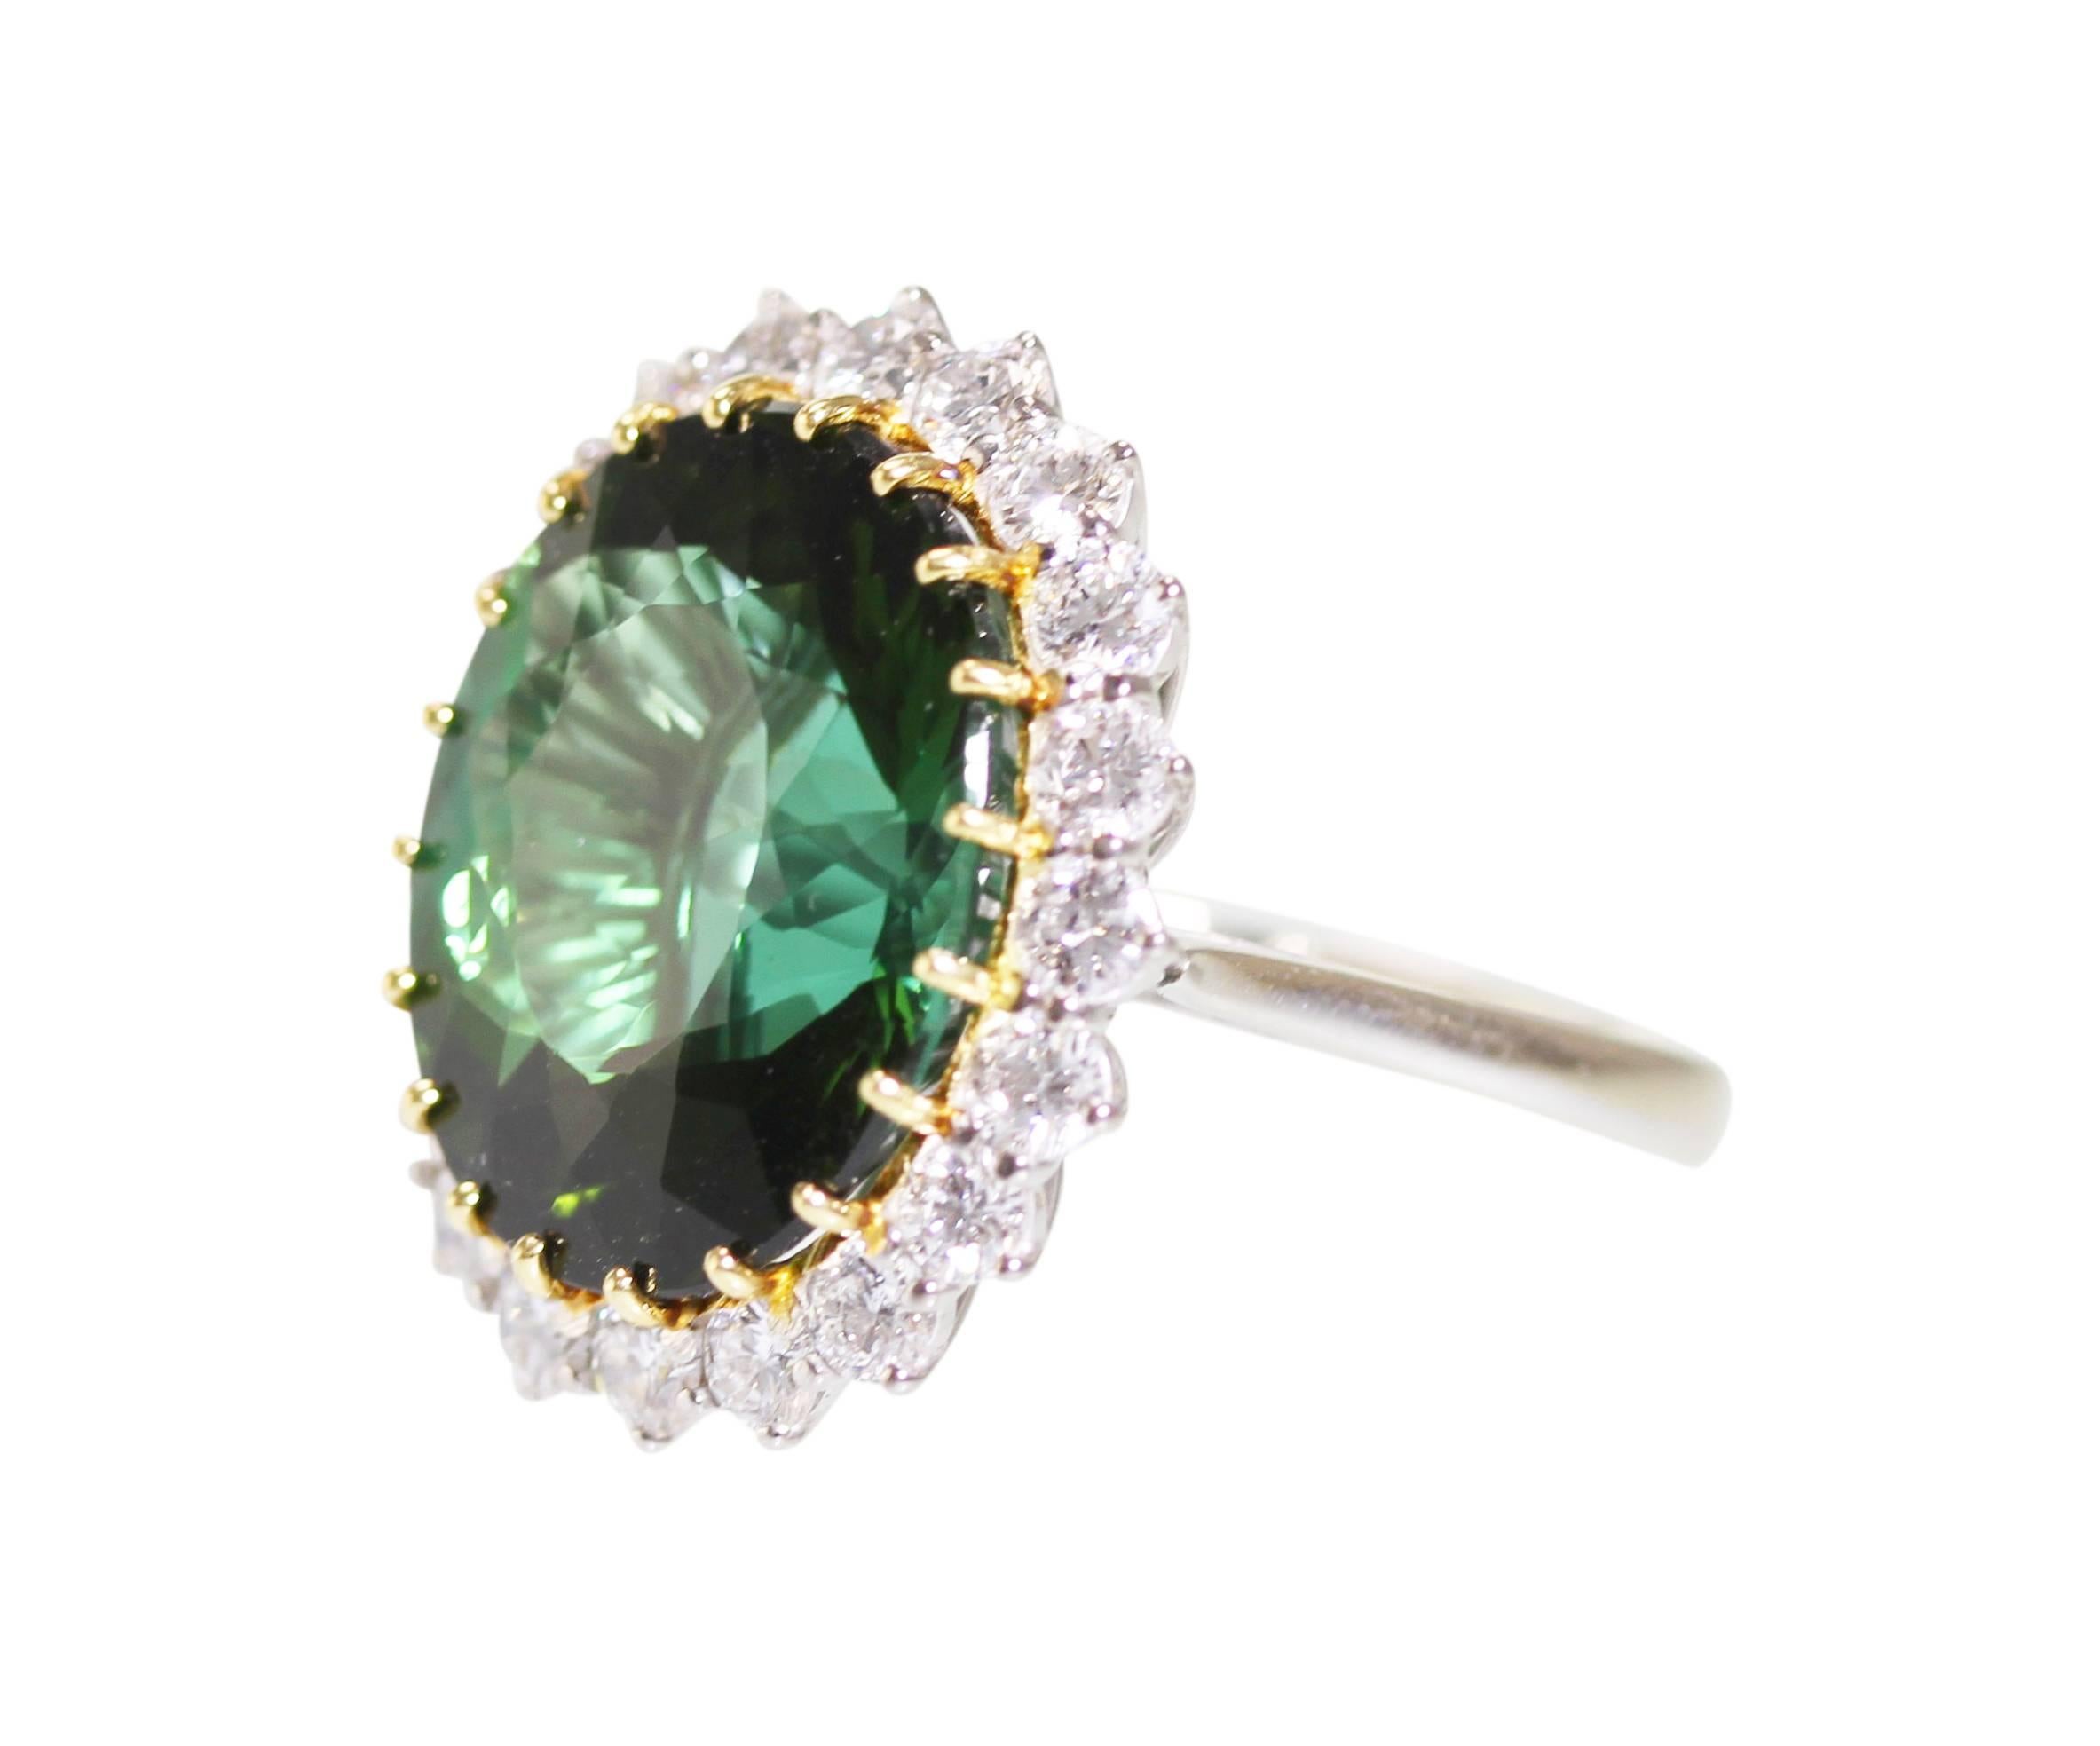 An 18 karat white and yellow gold, green tourmaline and diamond ring, set in the center with an oval green tourmaline weighing approximately 16.00 carats, framed by 20 round diamonds weighing approximately 1.75 carats, measuring 7/8 by 3/4 by 1 1/8